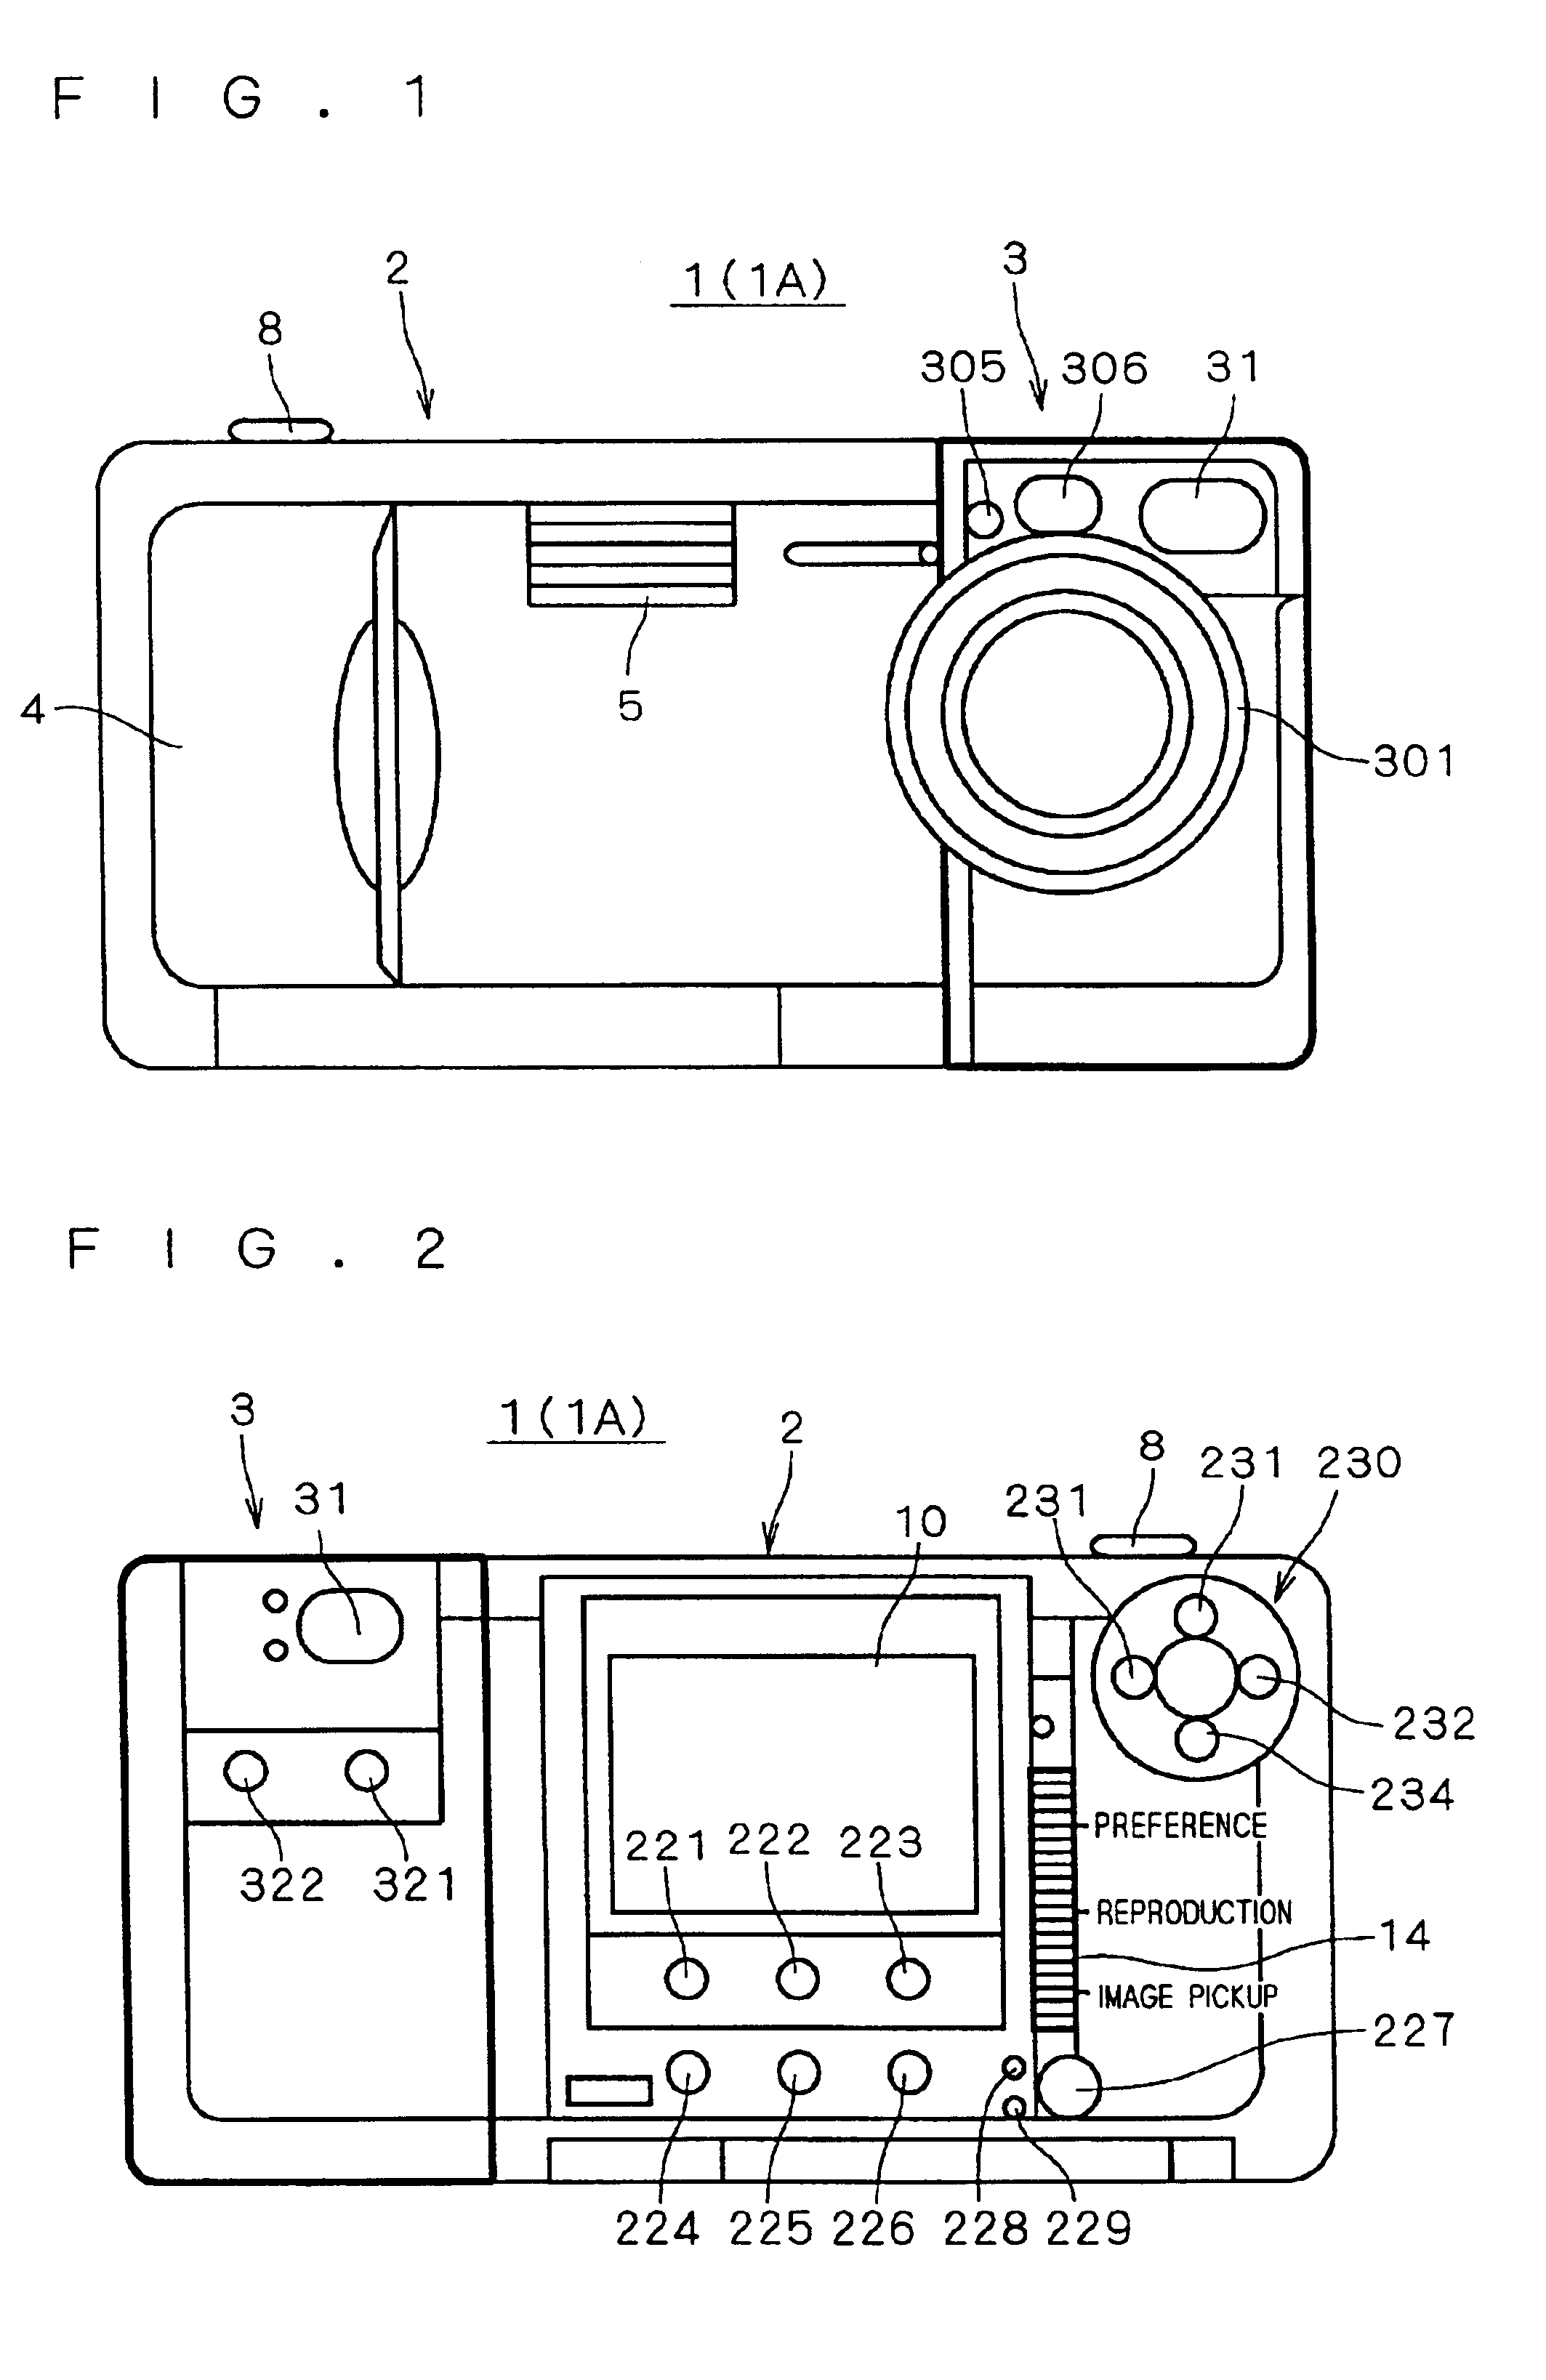 Digital camera having specifiable tracking focusing point